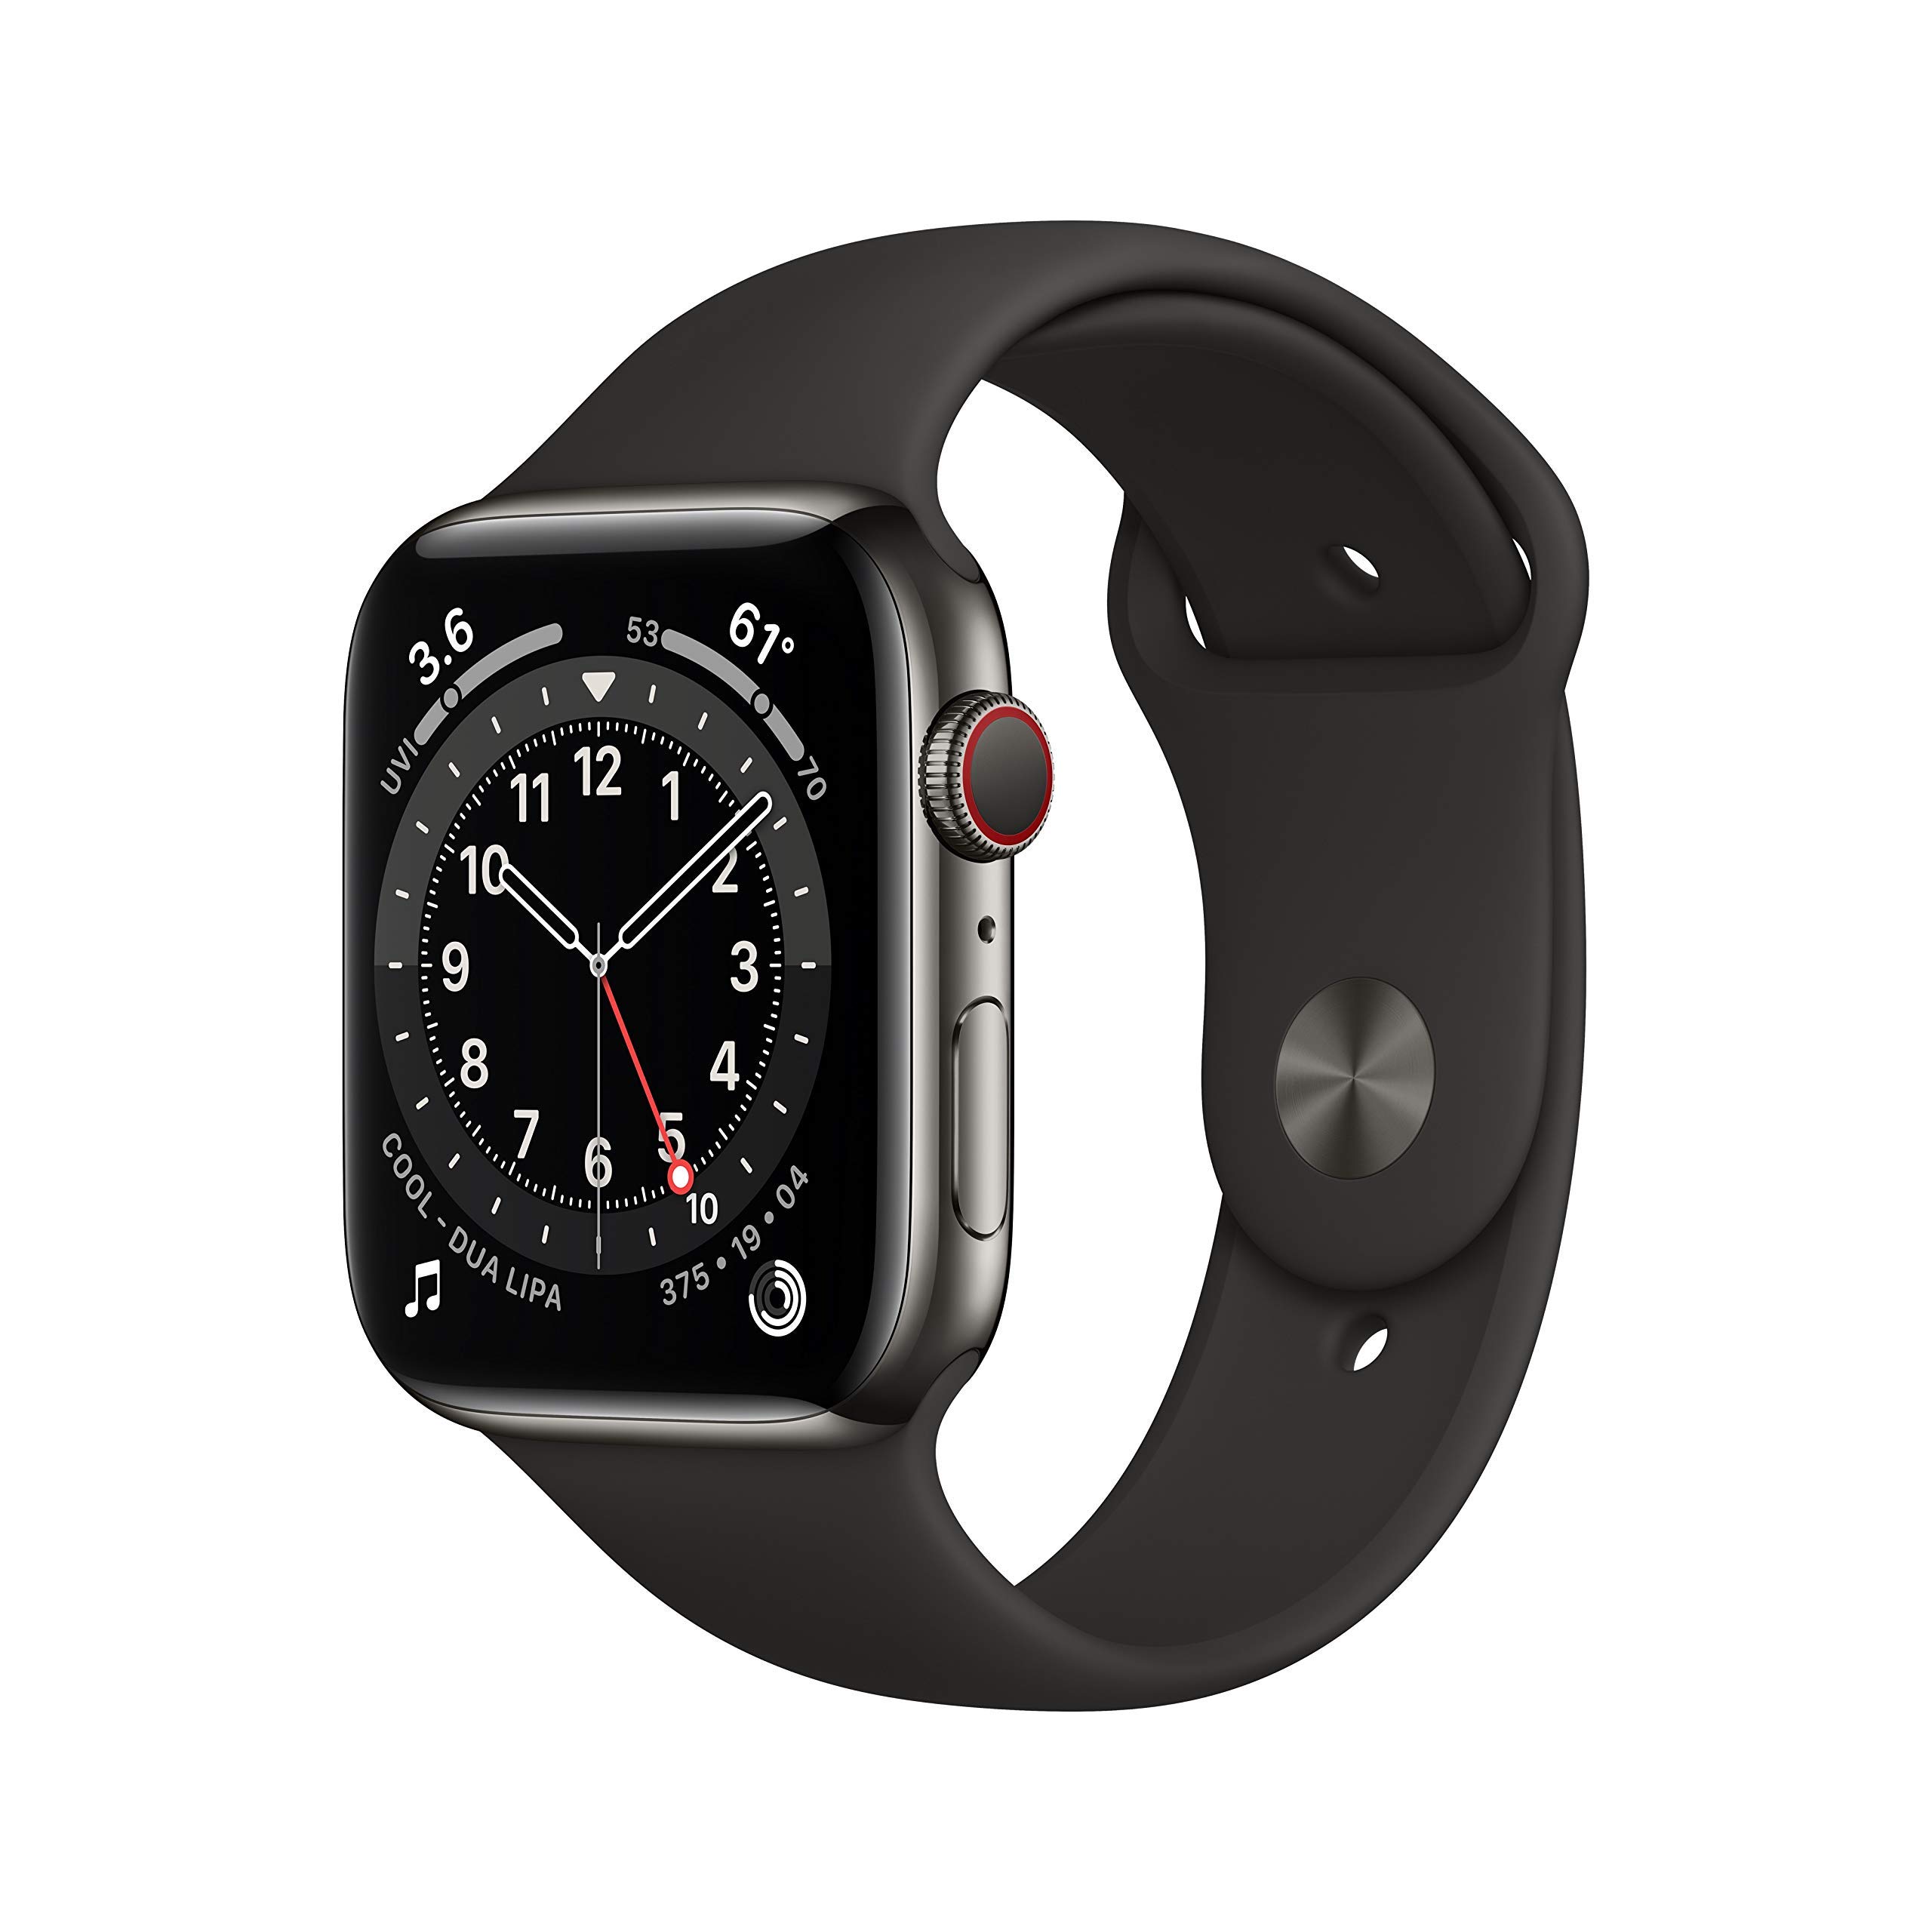 Apple Watch Series 6 (GPS + Cellular, 44mm) - Graphite Stainless Steel Case with Black Sport Band (Renewed)